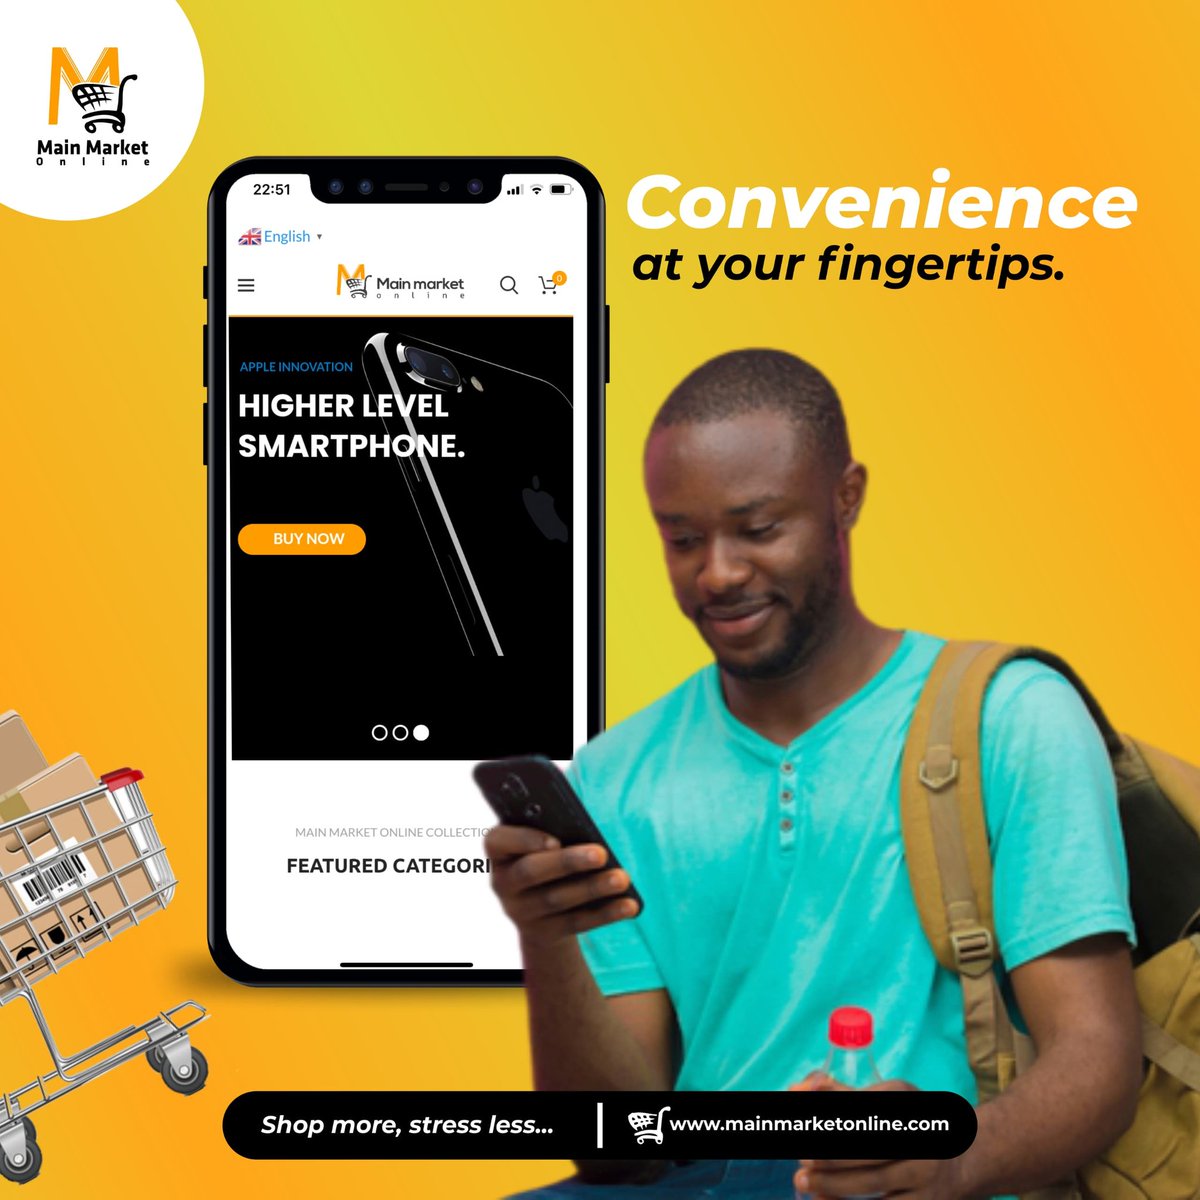 Convenience at your fingertips! With MainMarketOnline, shop from the comfort of your home and enjoy doorstep delivery. #convenience #onlineordering #shoplocal #easypurchase #MMO #MainMarketOnline #OnlineShop